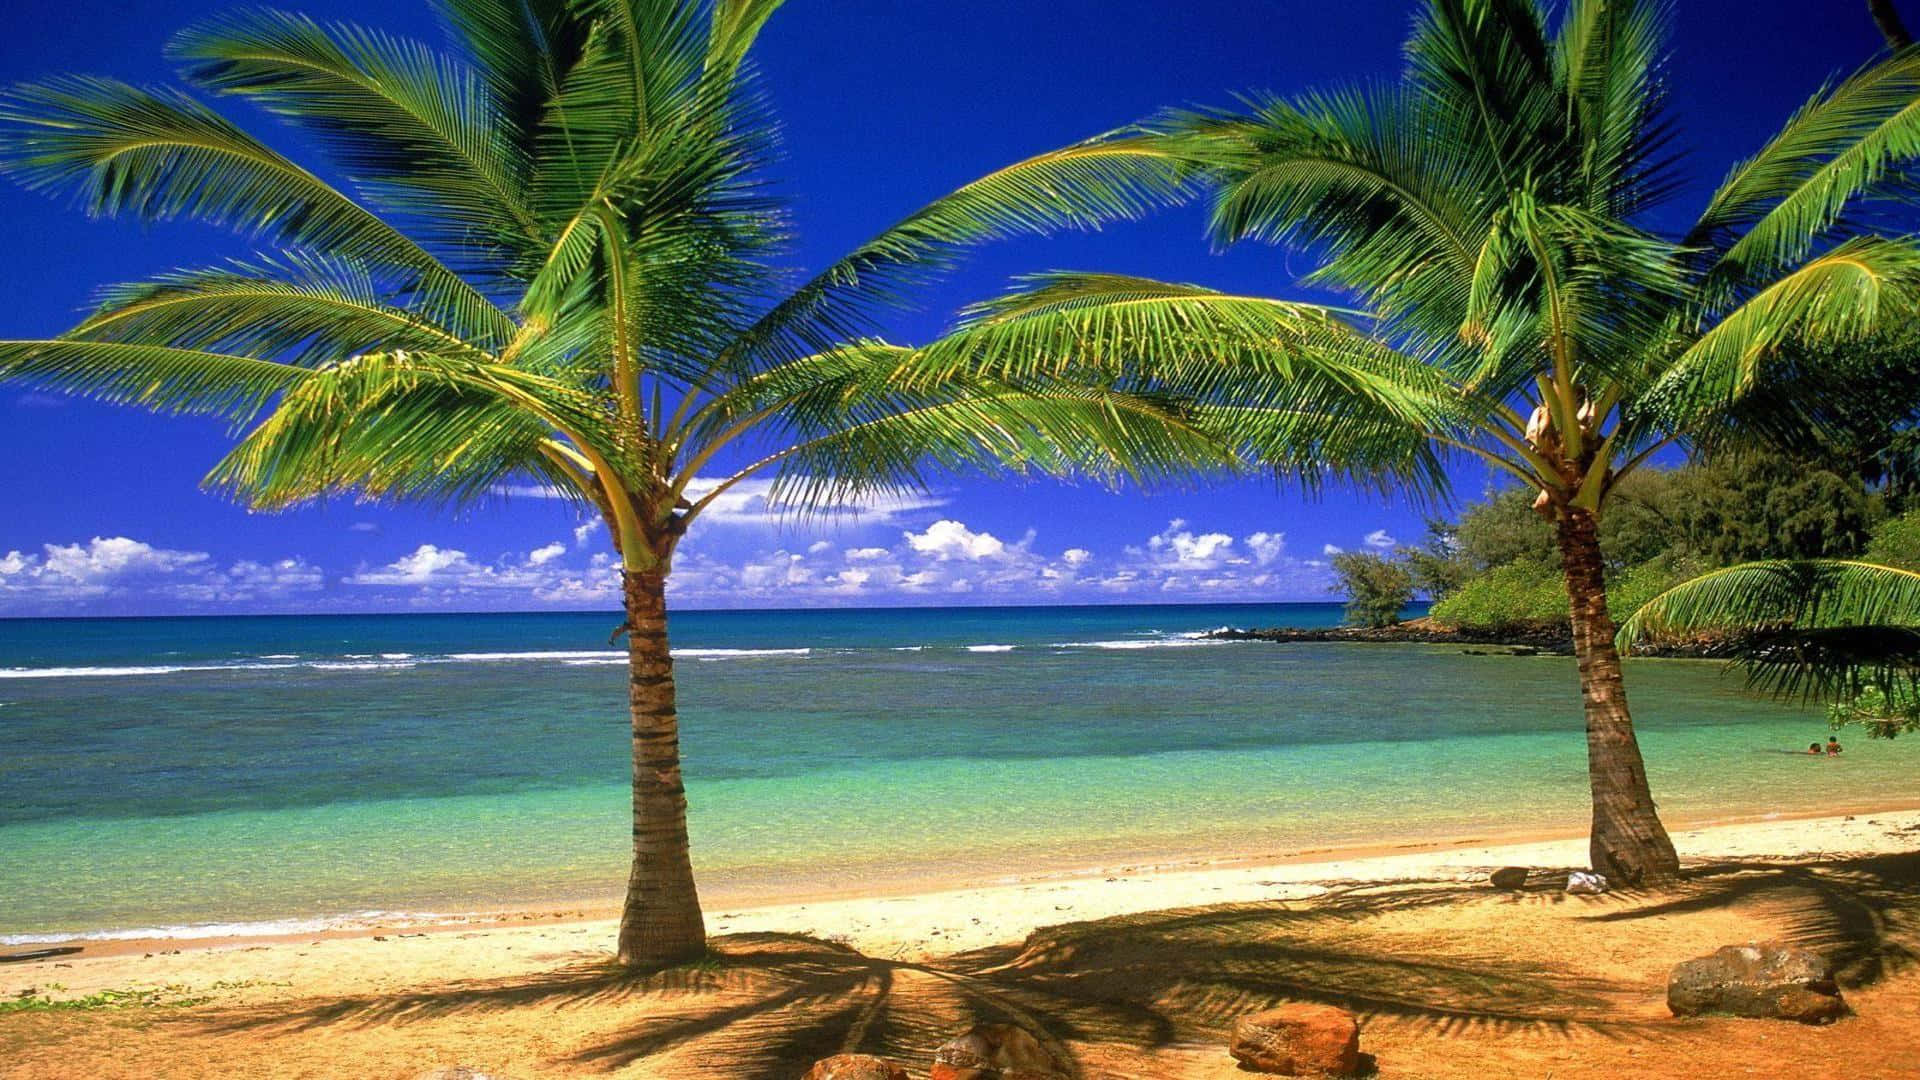 Take a break from reality and relax at Palm Tree Beach Wallpaper